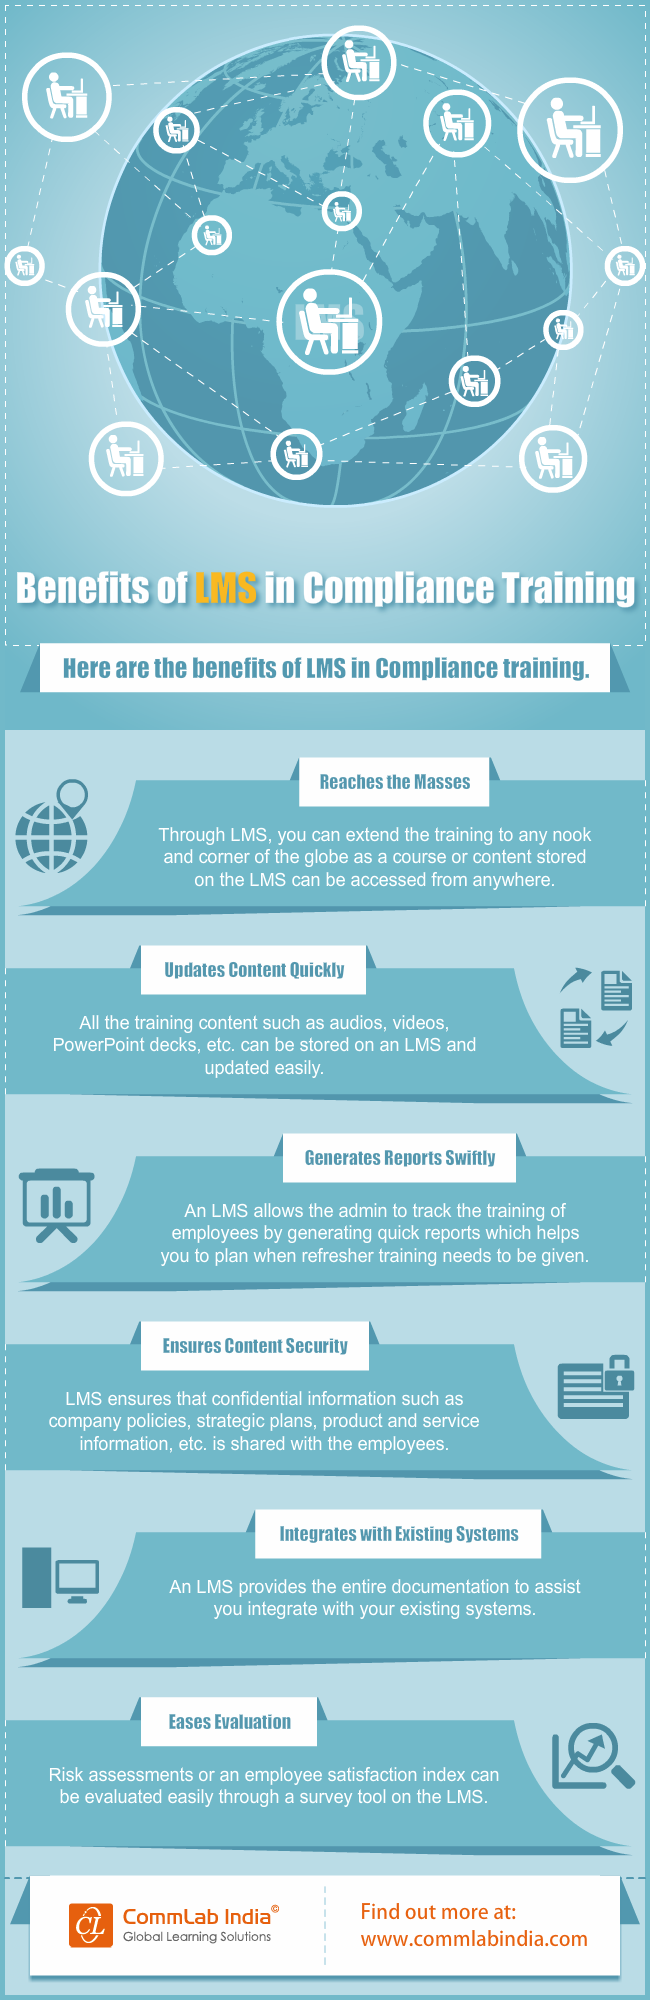 Benefits of LMS in Compliance Training [Infographic]